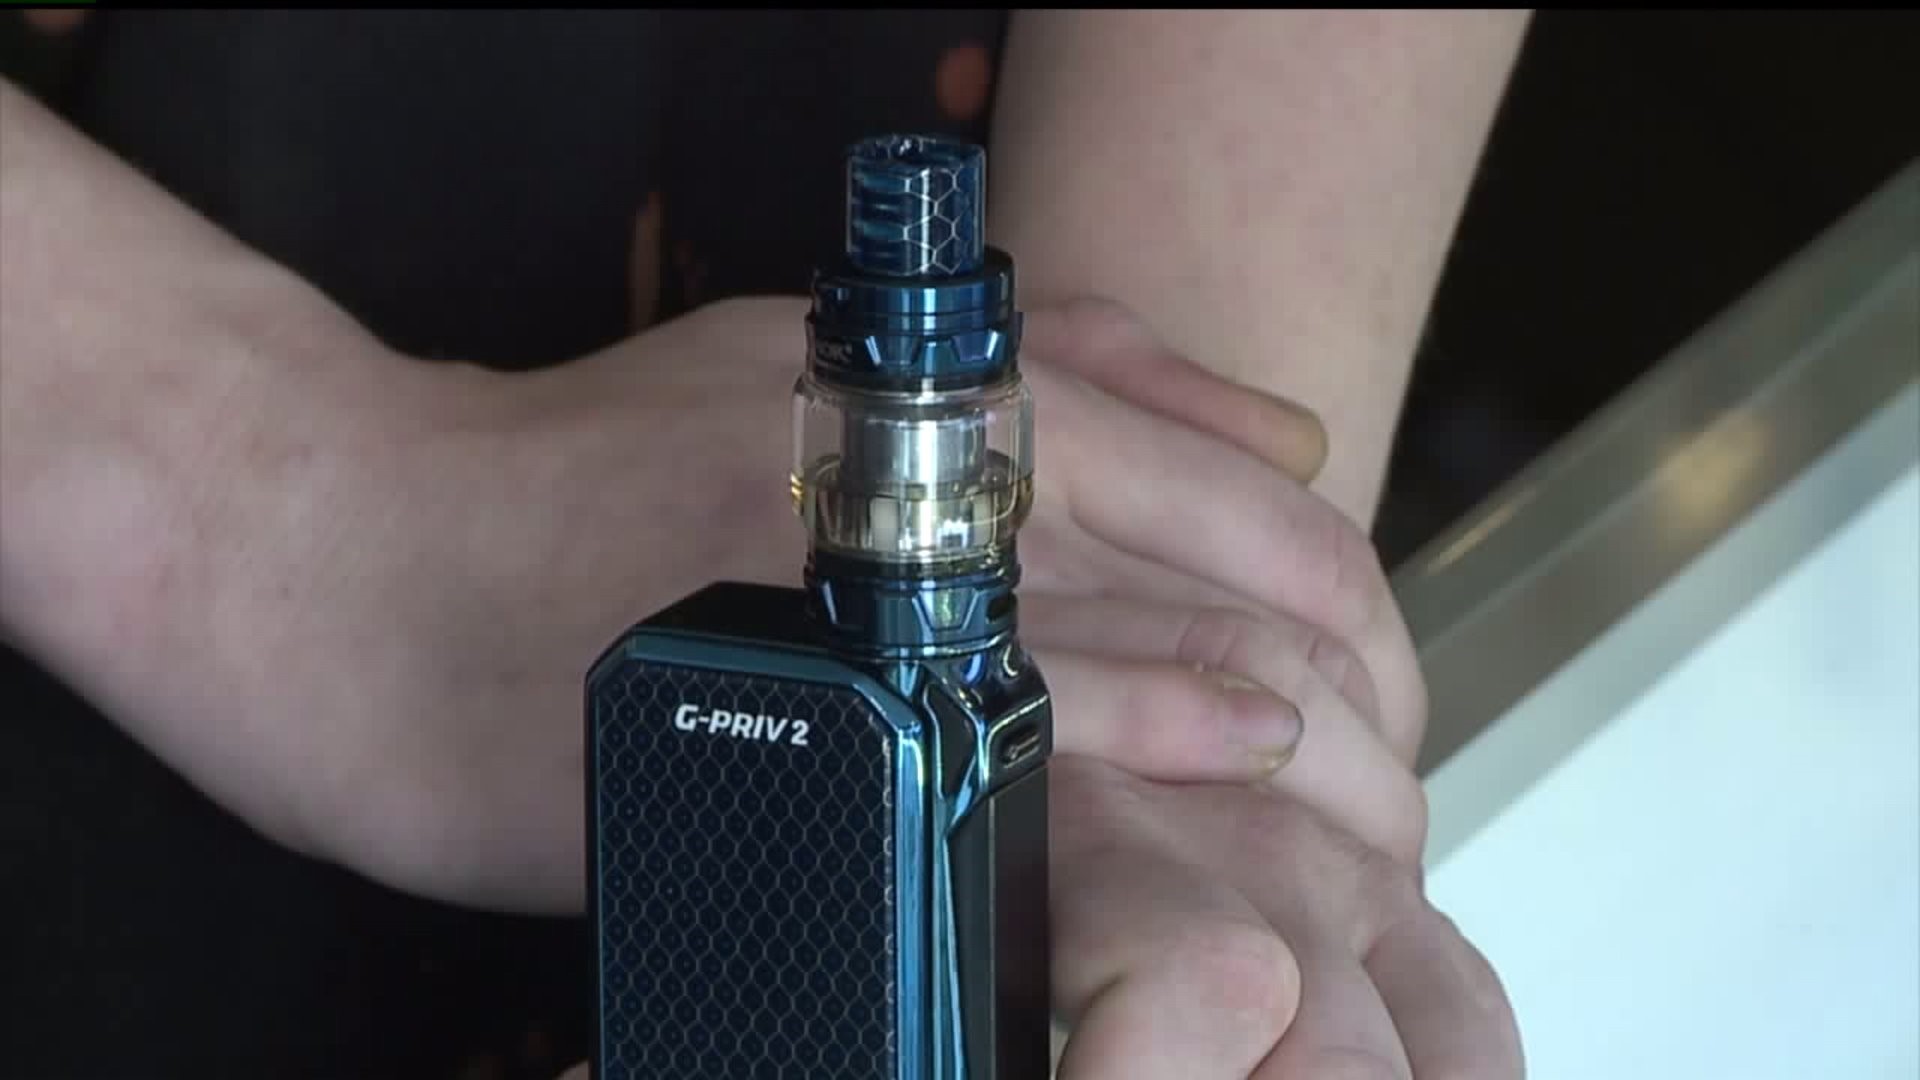 Illinois lawmakers push to raise legal smoking and vaping age